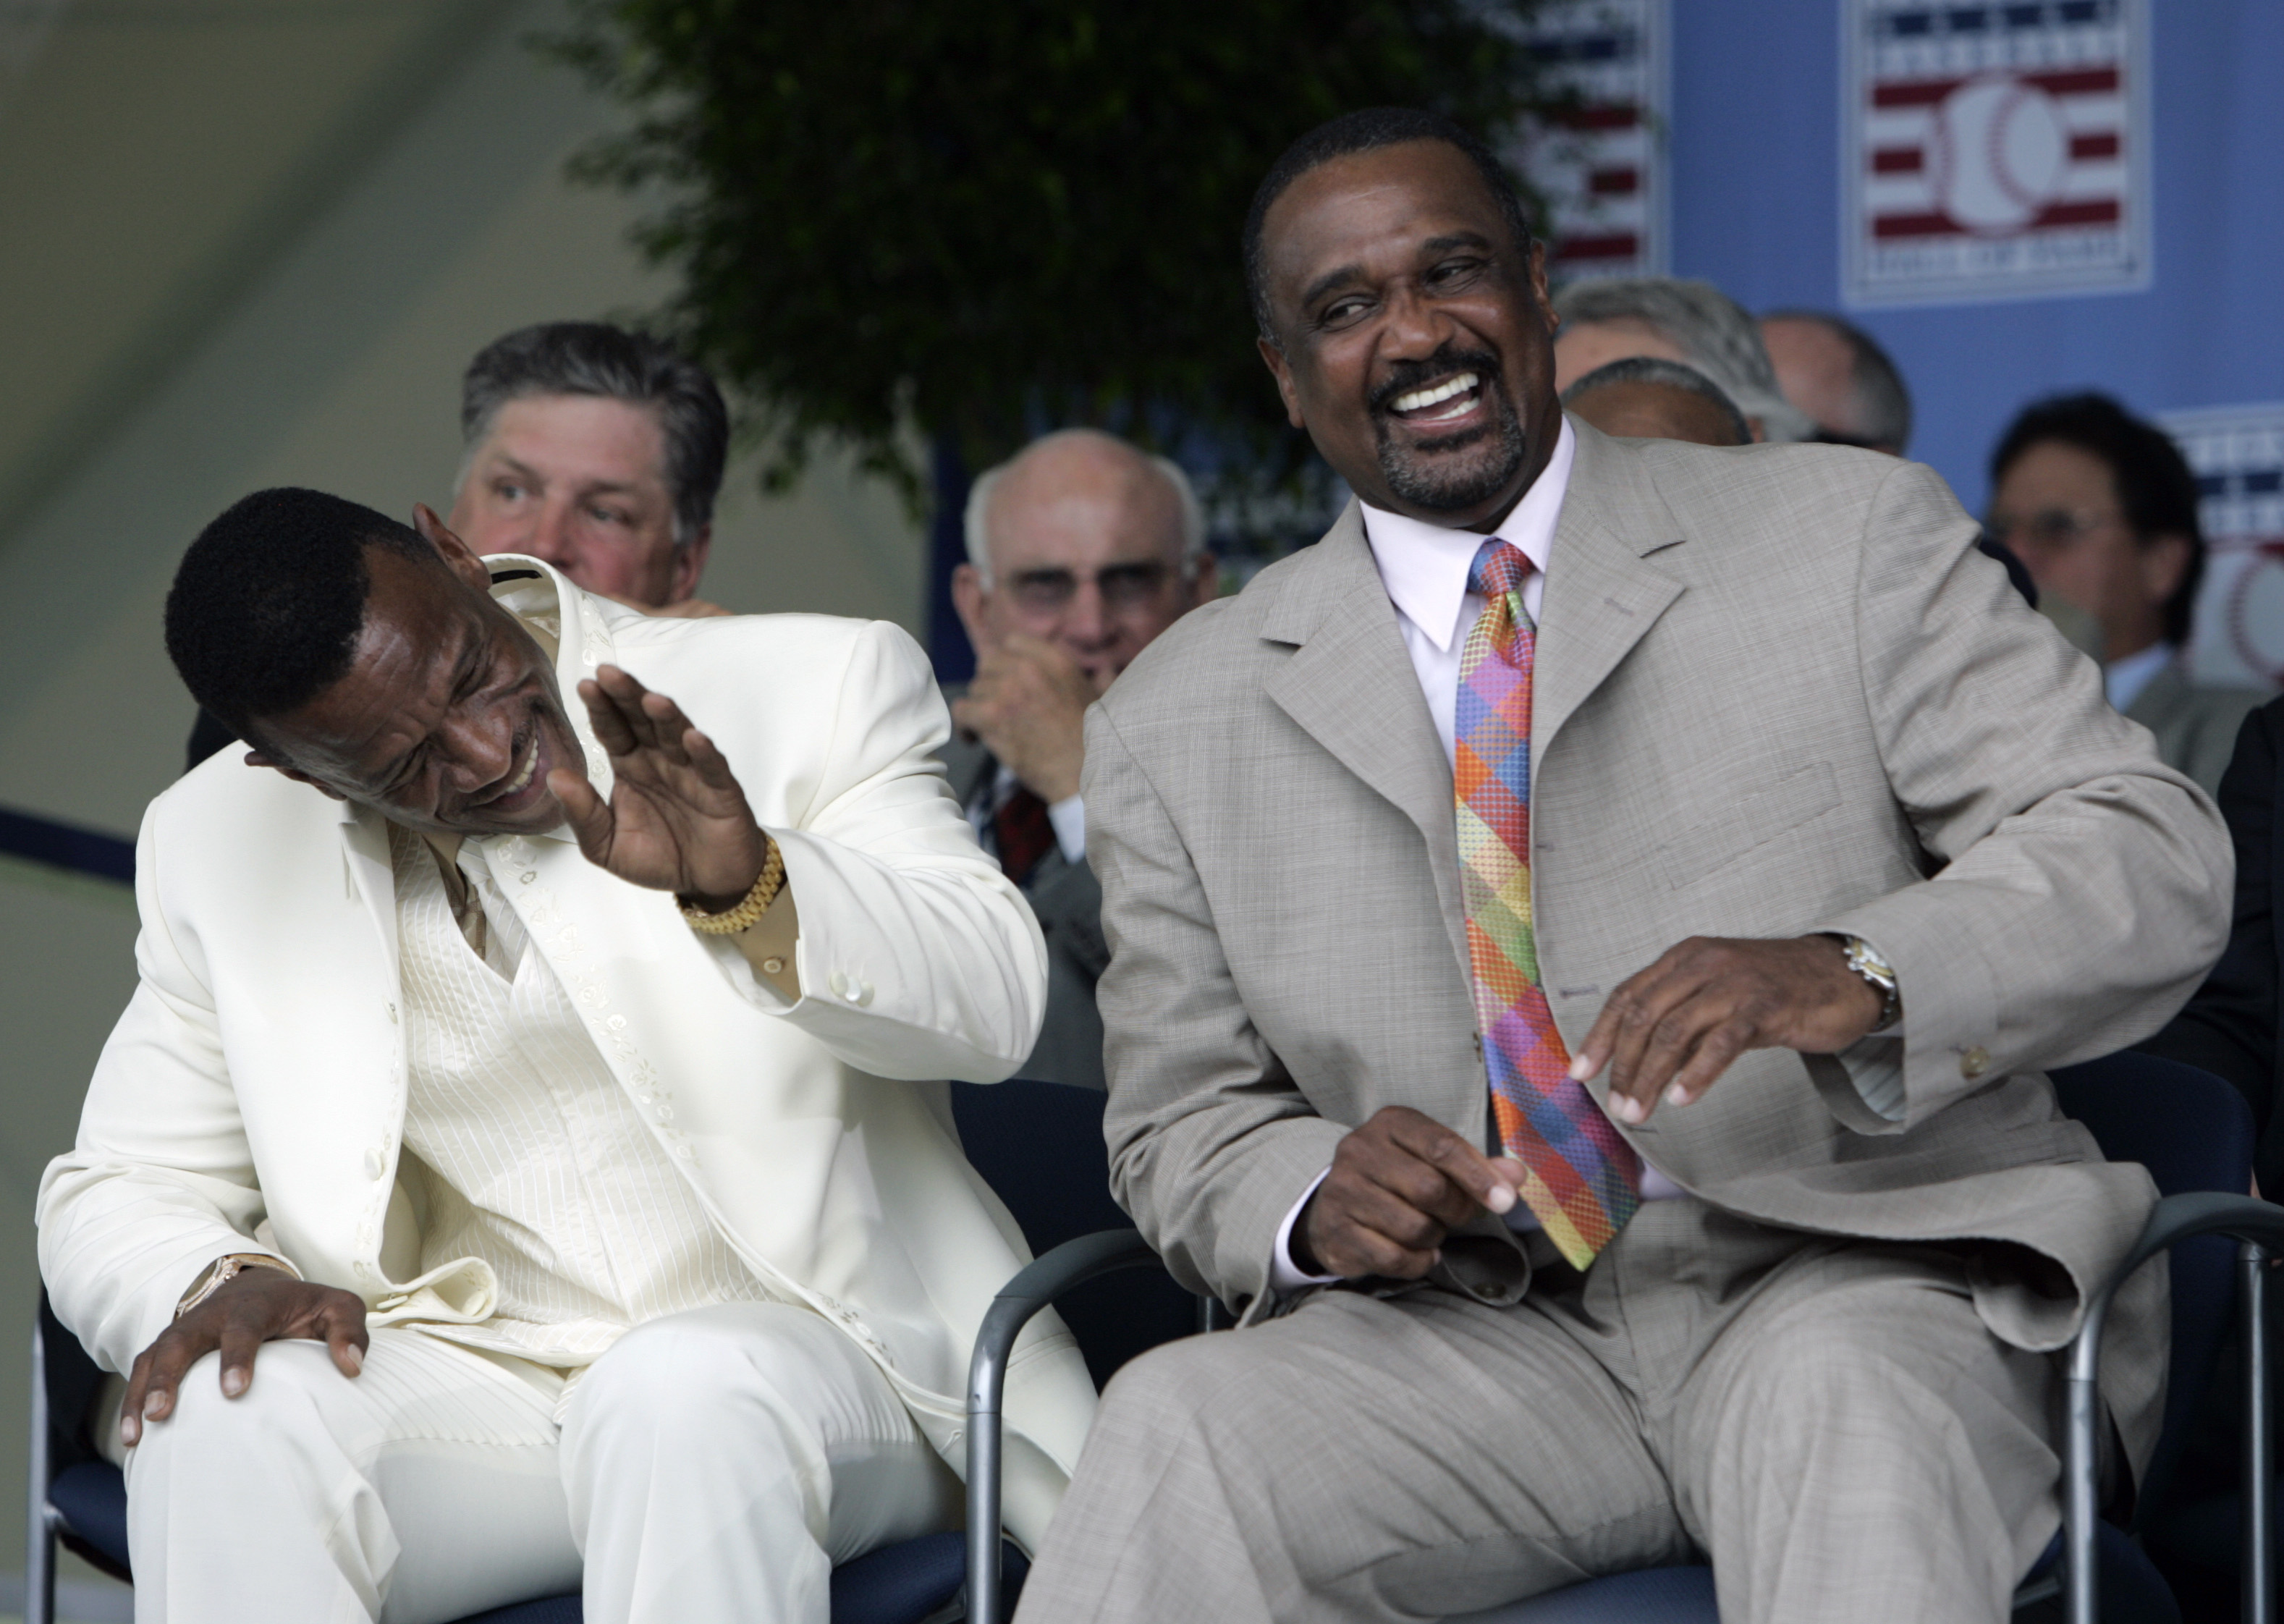 Jim Rice and Rickey Henderson inducted into the Baseball Hall of Fame